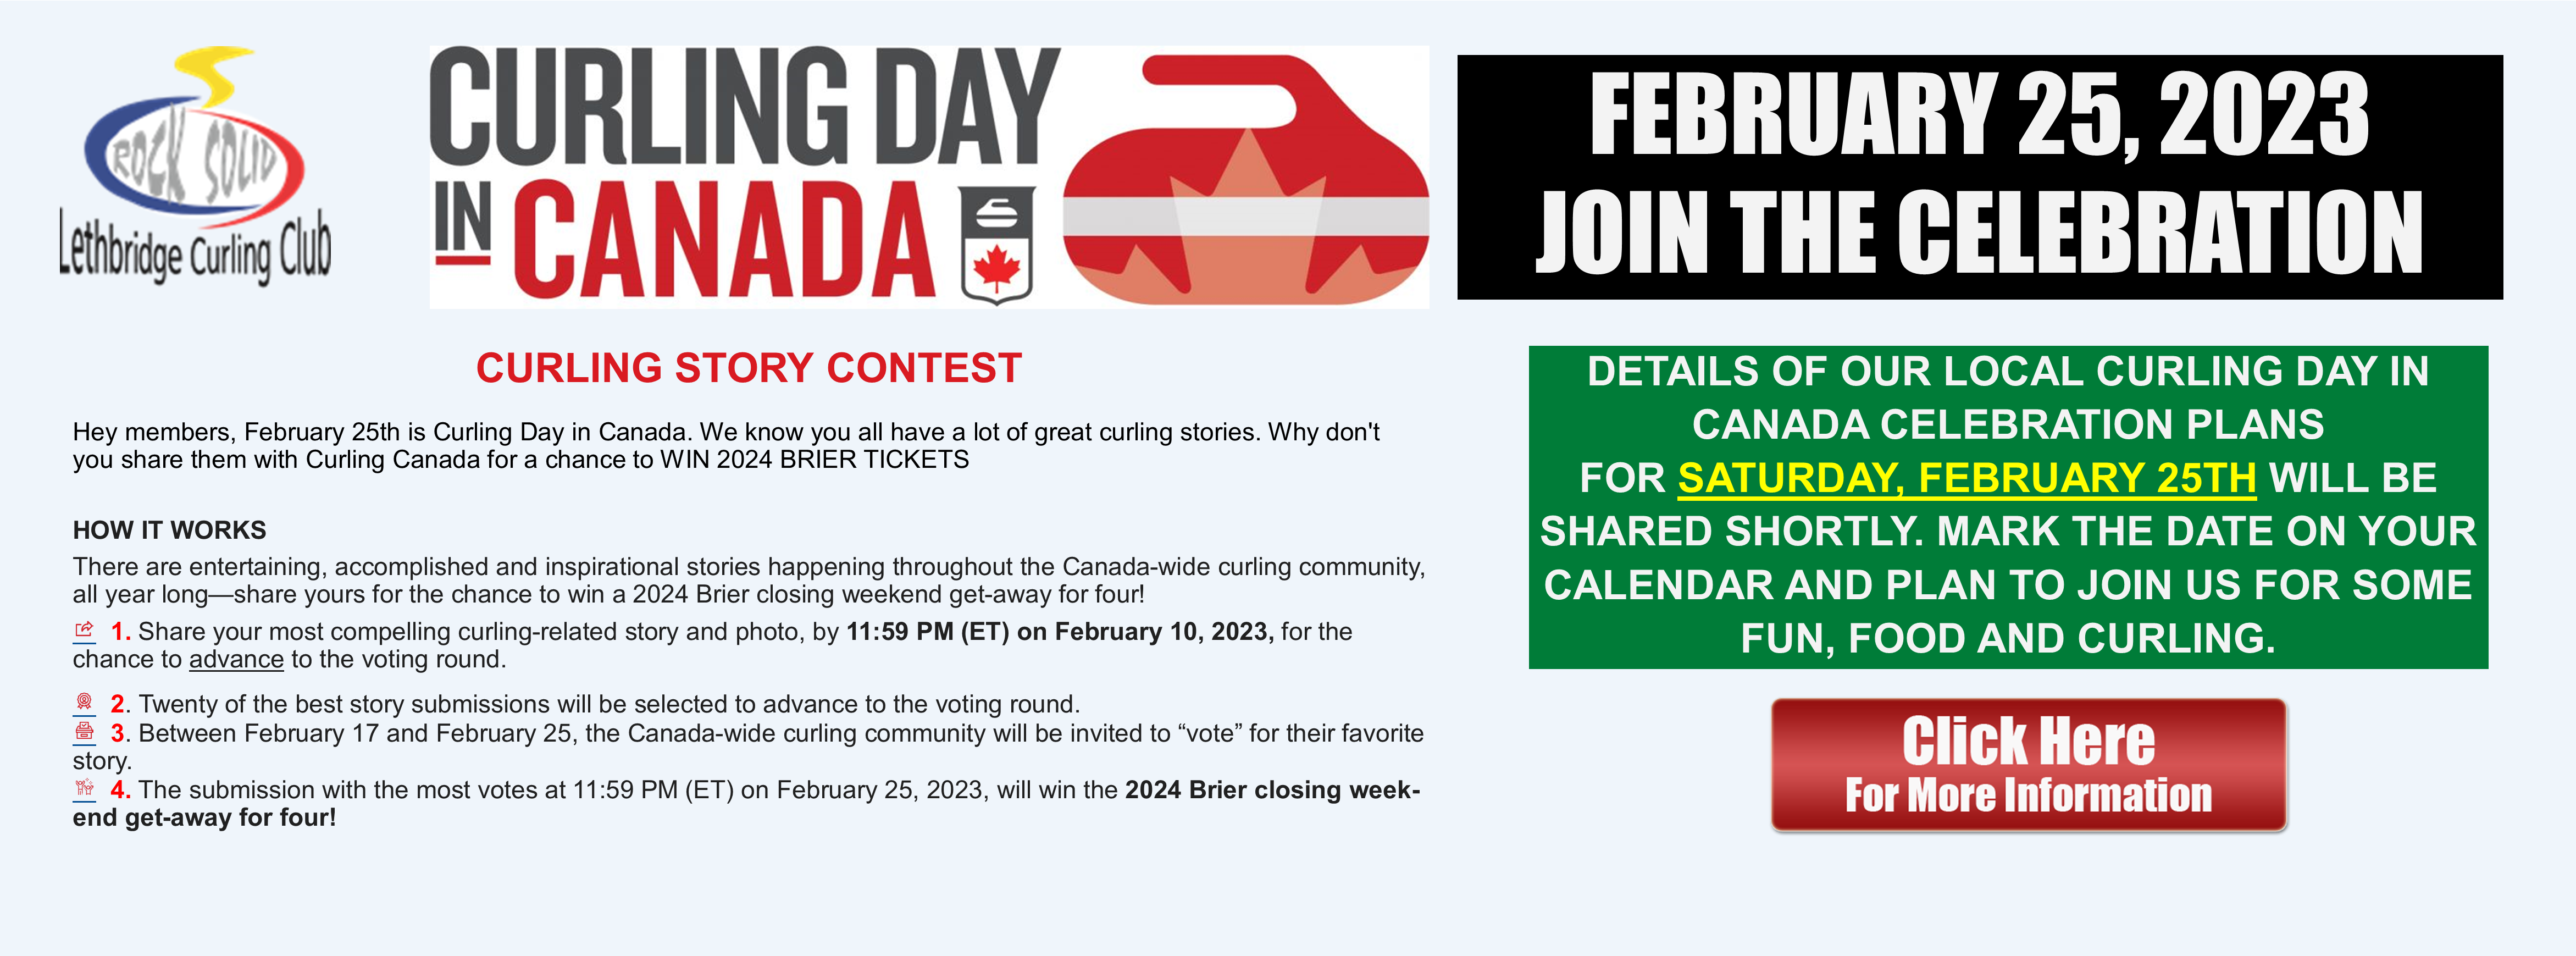 <div id=slideshow_title>CURLING DAY IN CANADA - STORY CONTEST</div> <br><div style='text-align: left; font-size: 18px;'></div>